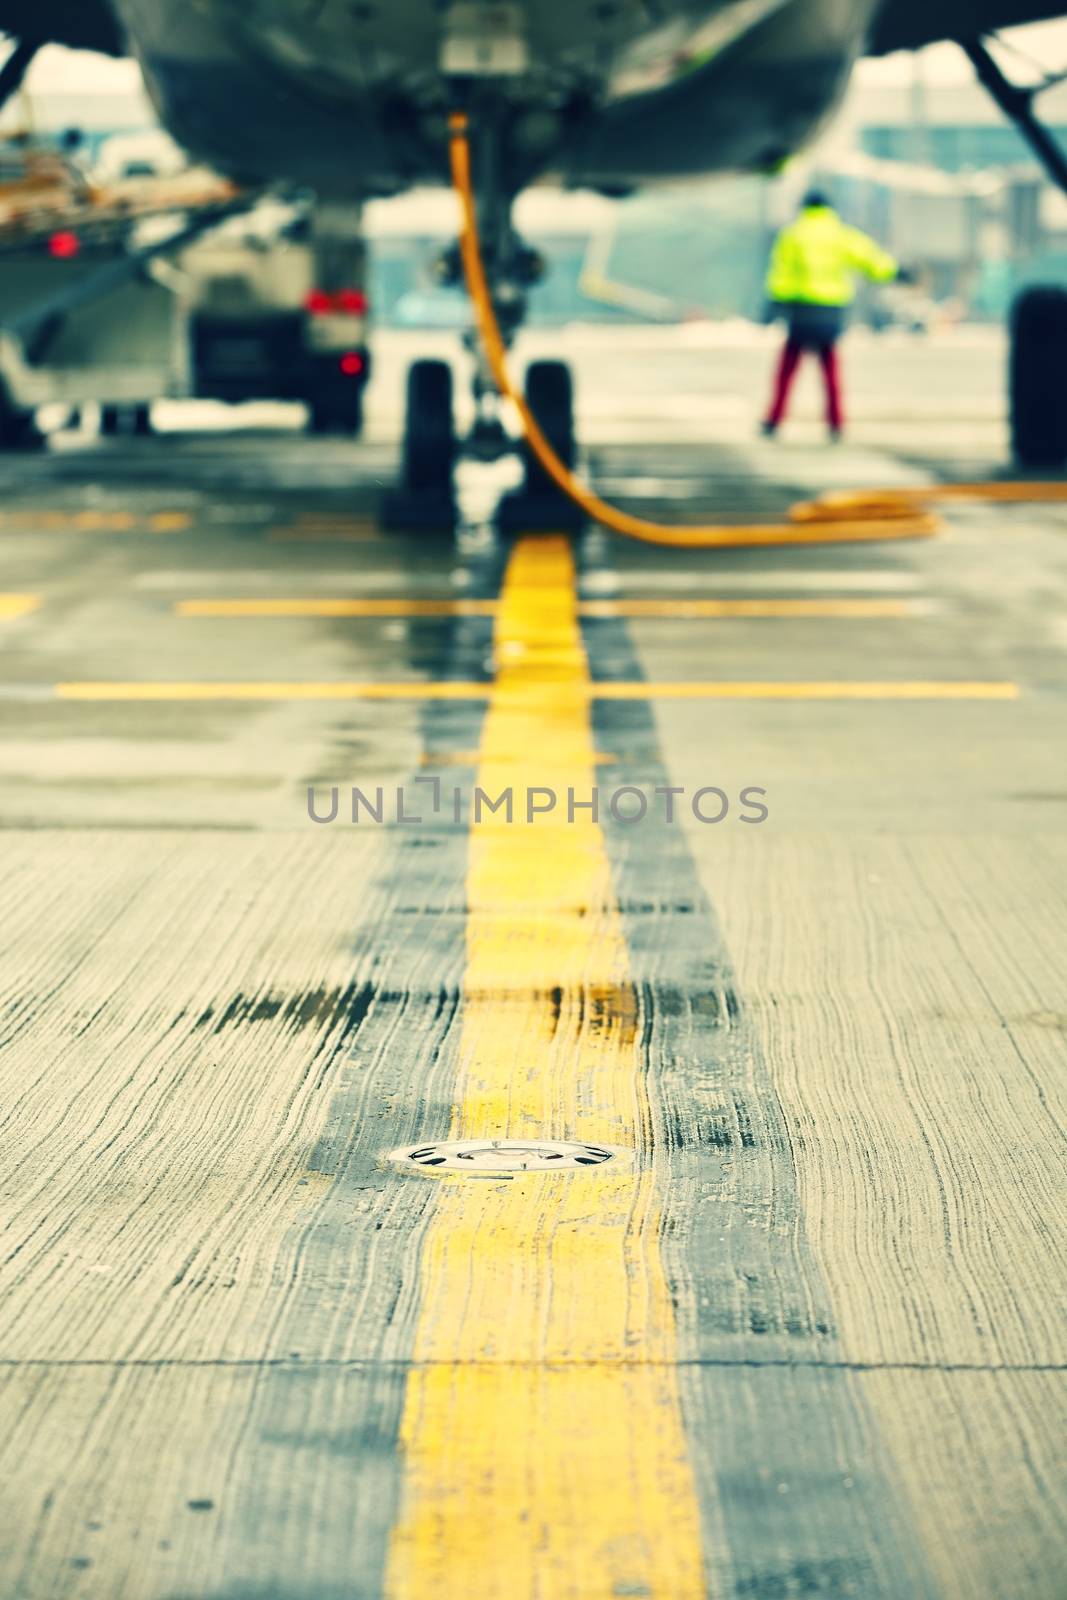 Airplane is parking at the airport - selective focus